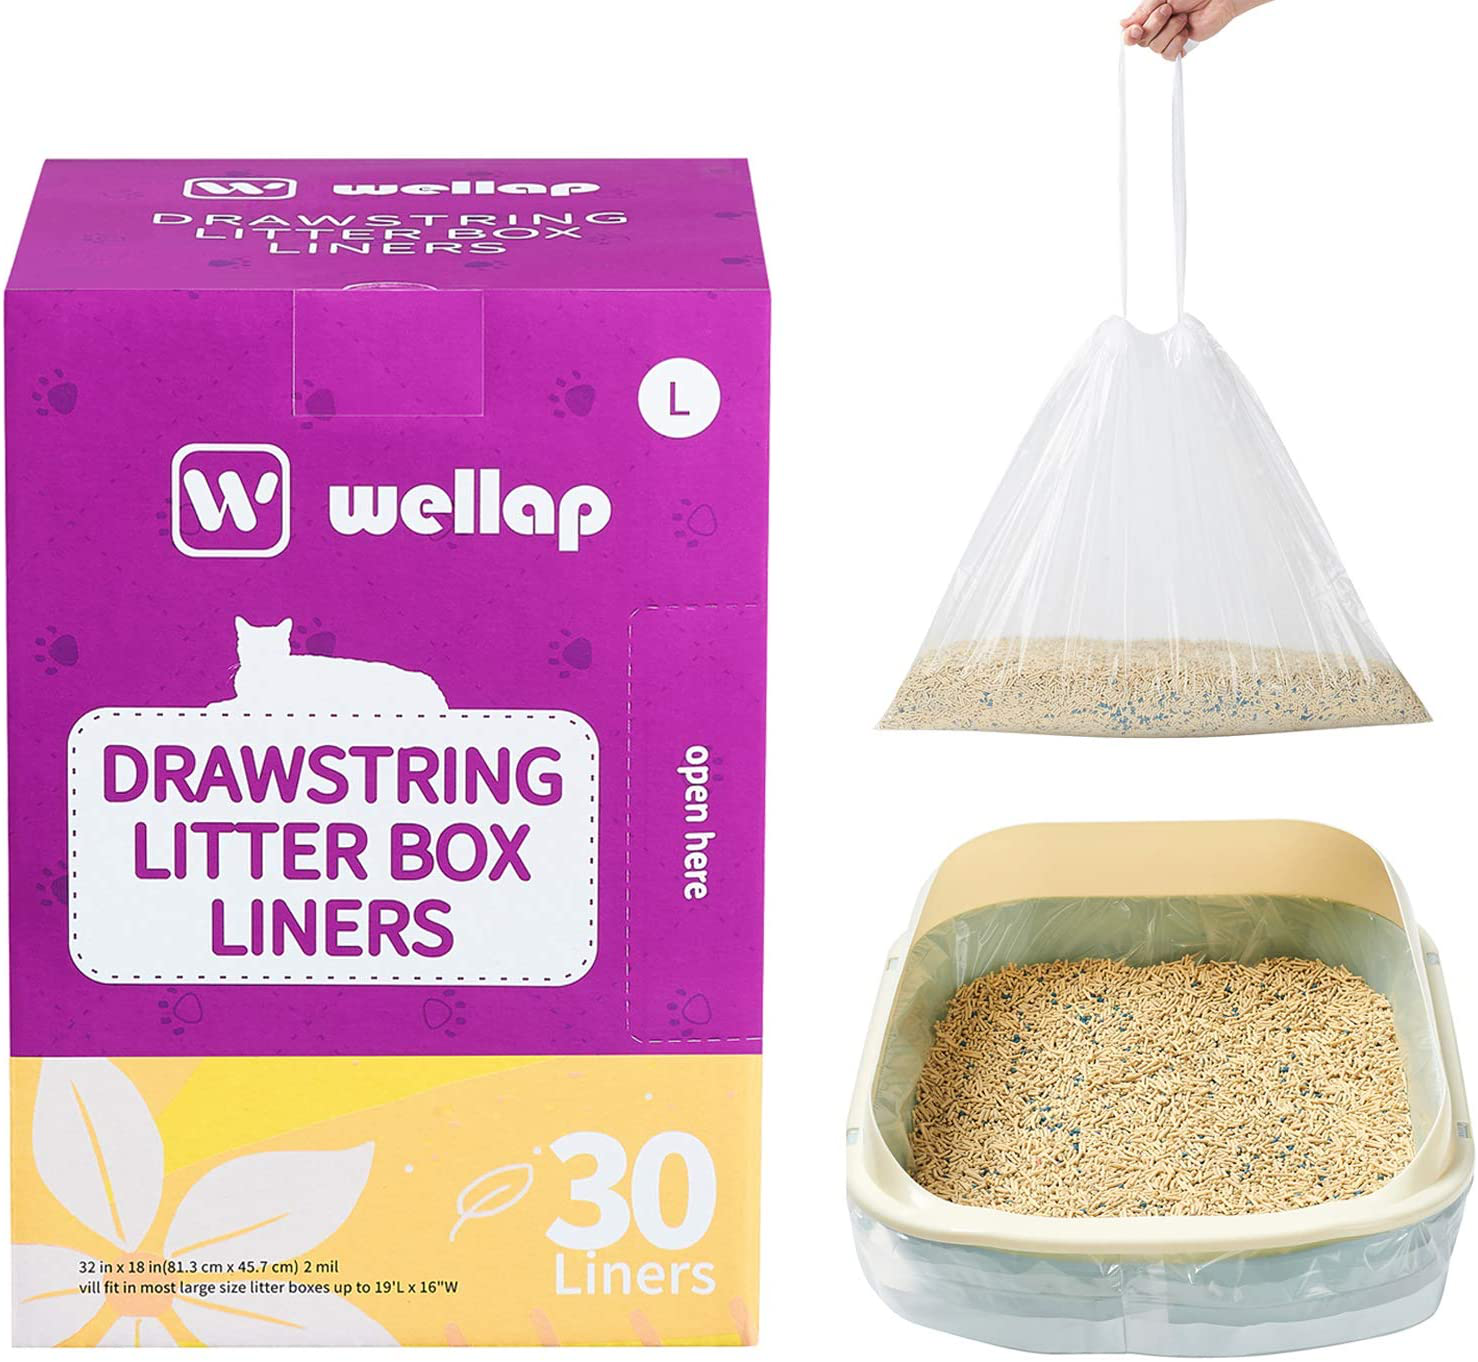 Wellap Cat Litter Box Liners Jumbo (43" X 21" Etc. 8 Sizes) Durable 30/40 Count Drawstring Kitty Litter Bags